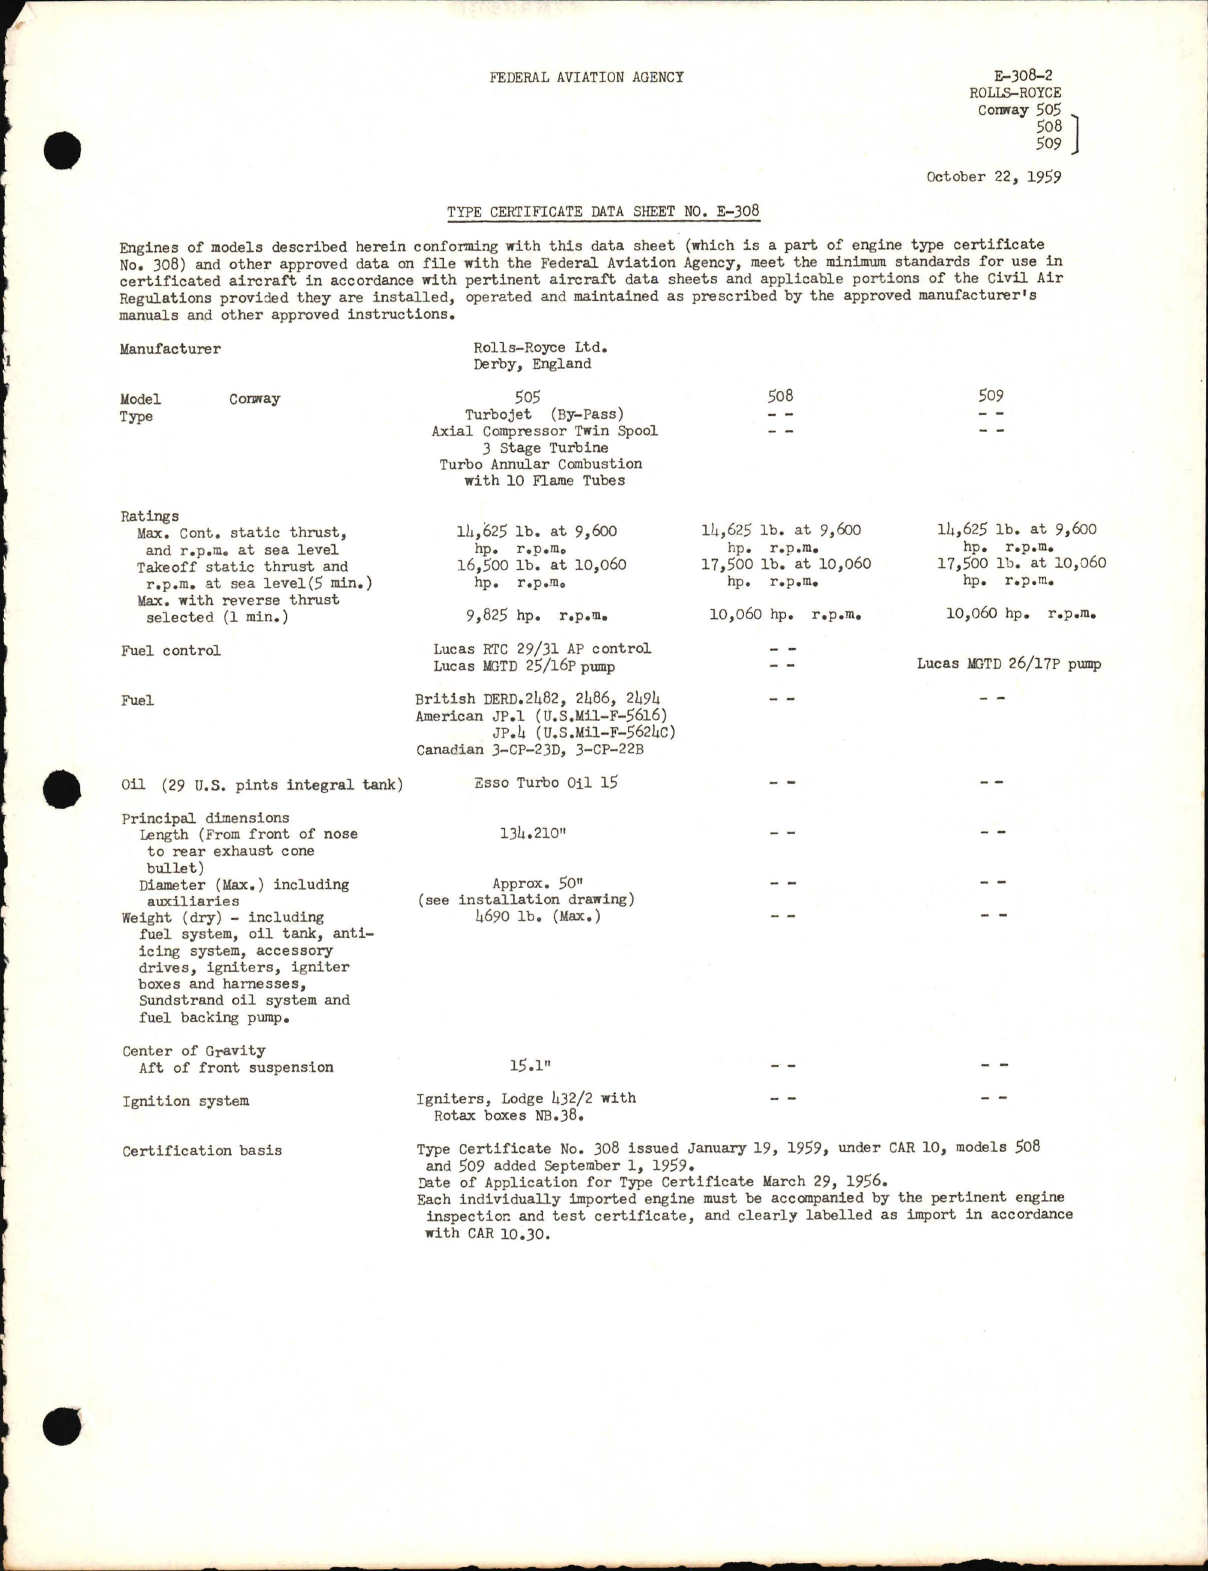 Sample page 1 from AirCorps Library document: Conway 505, 508, and 509